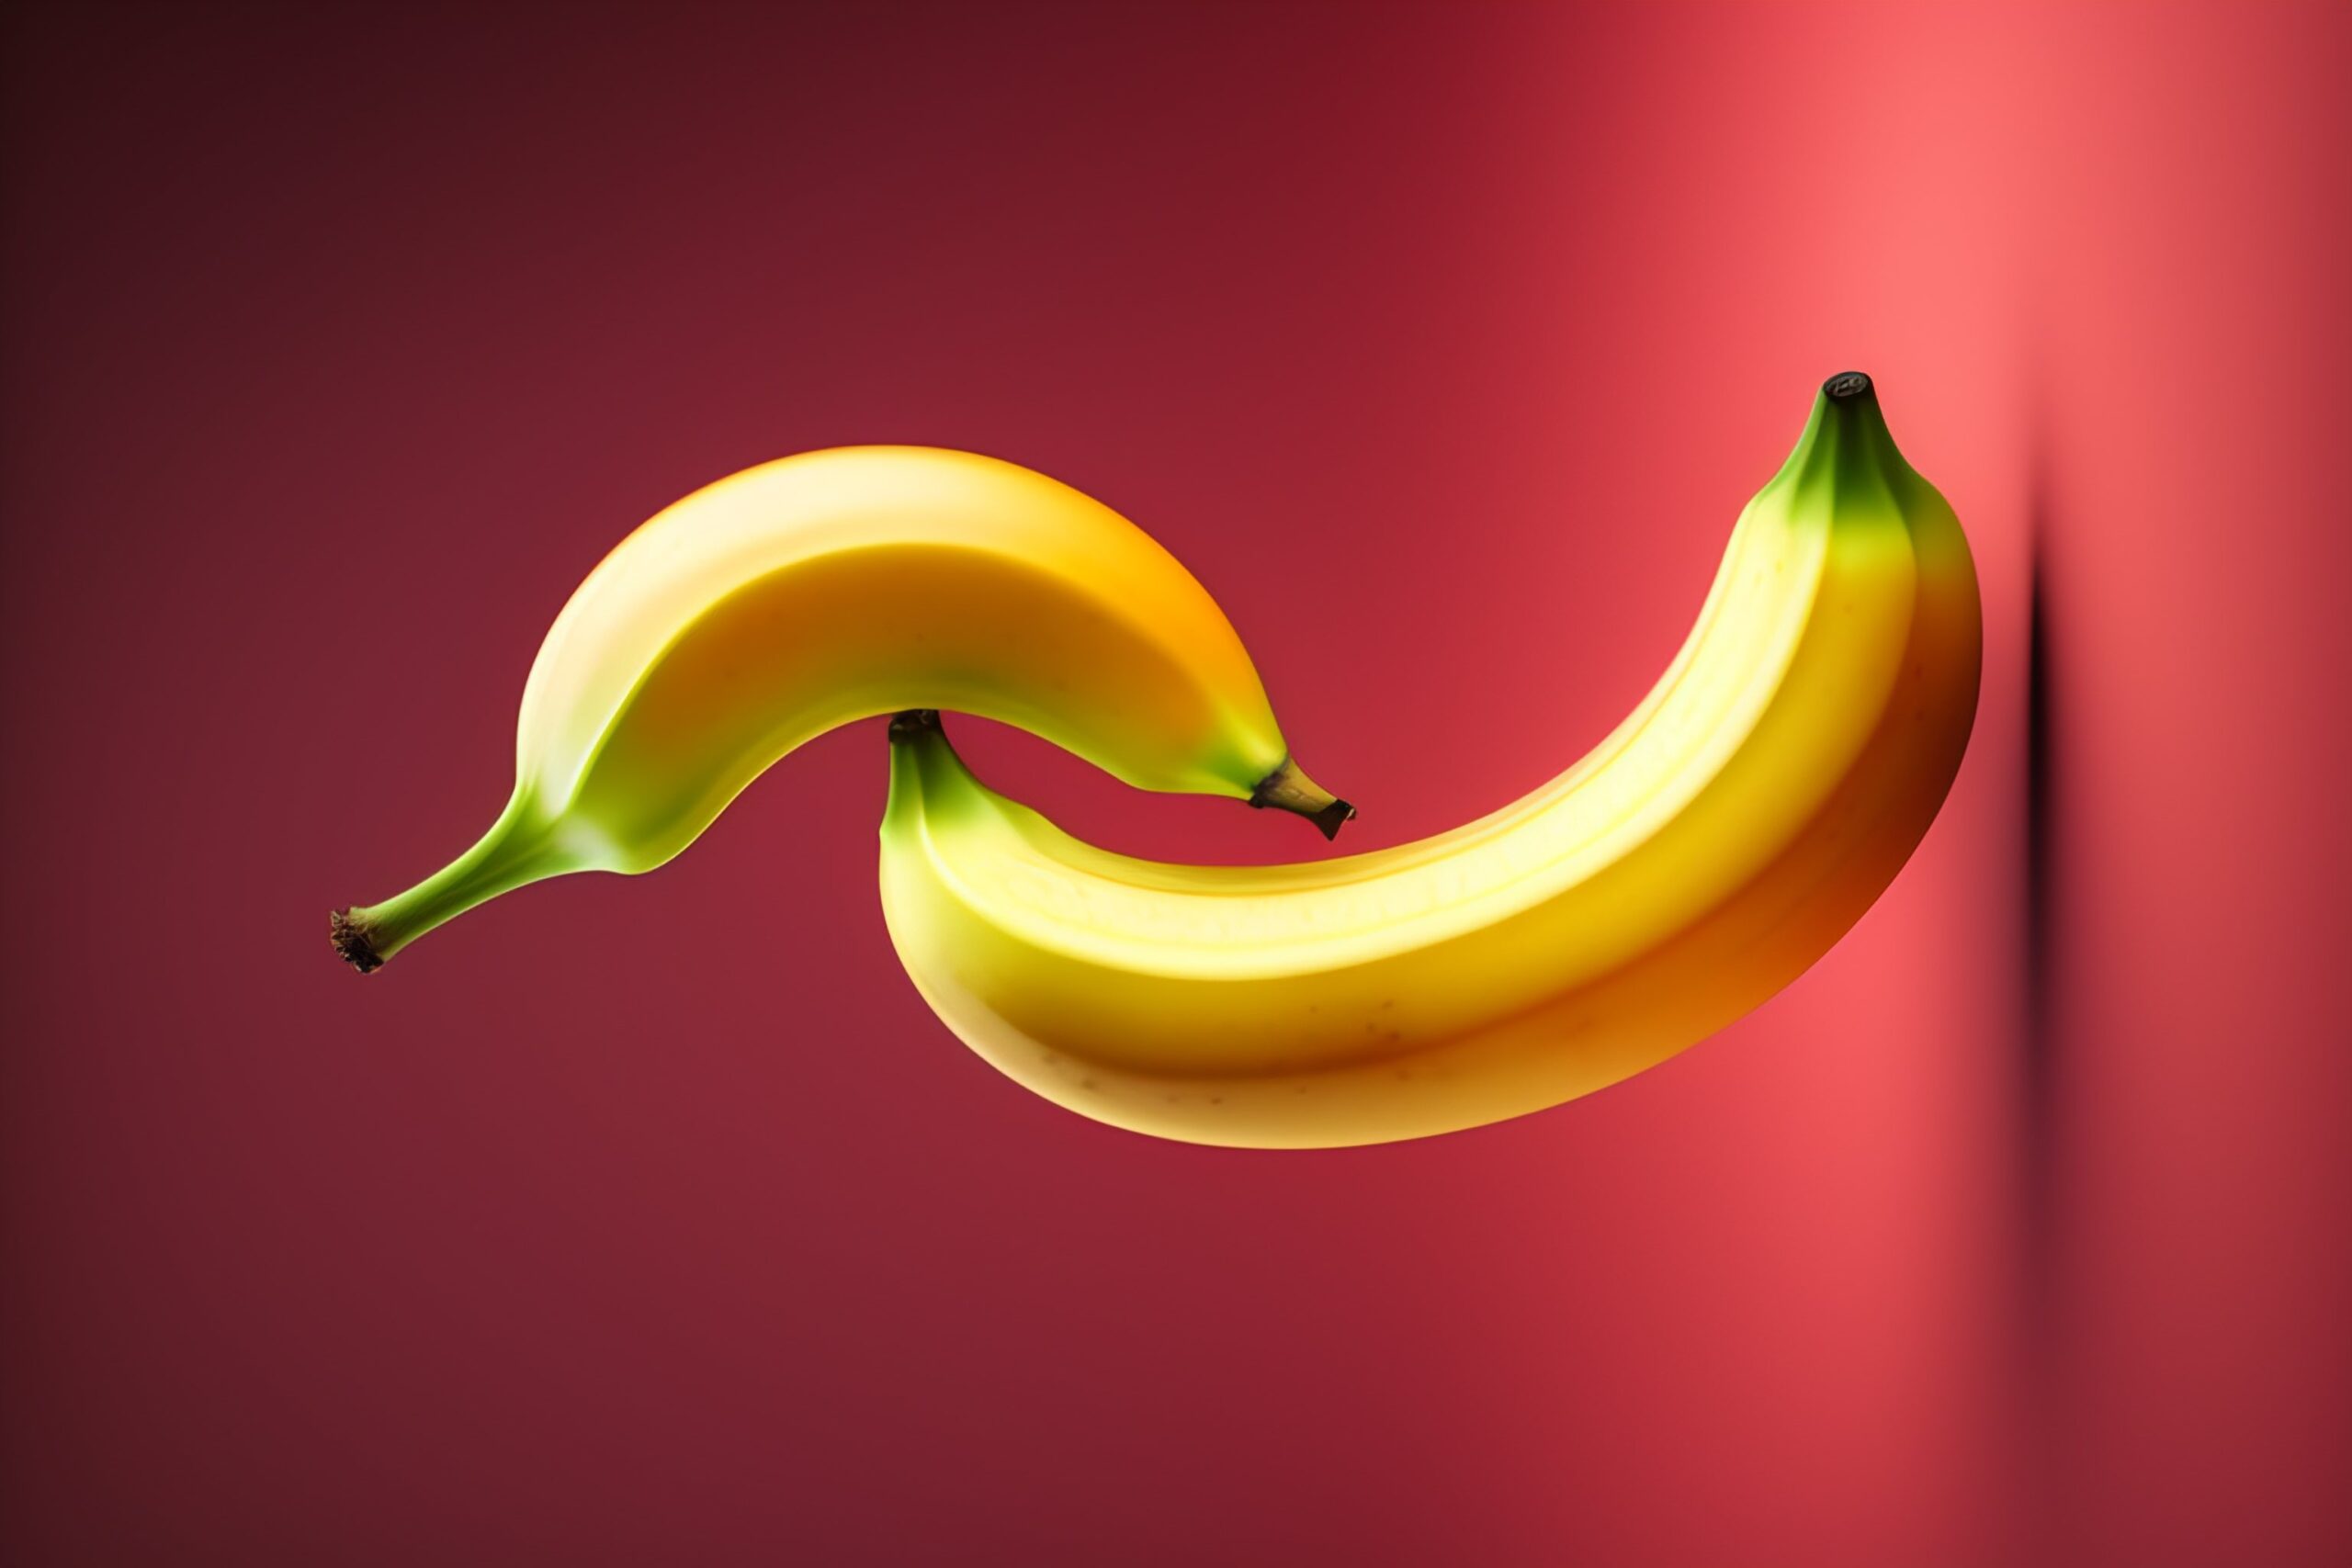 A banana character is a portrait with arms and leg